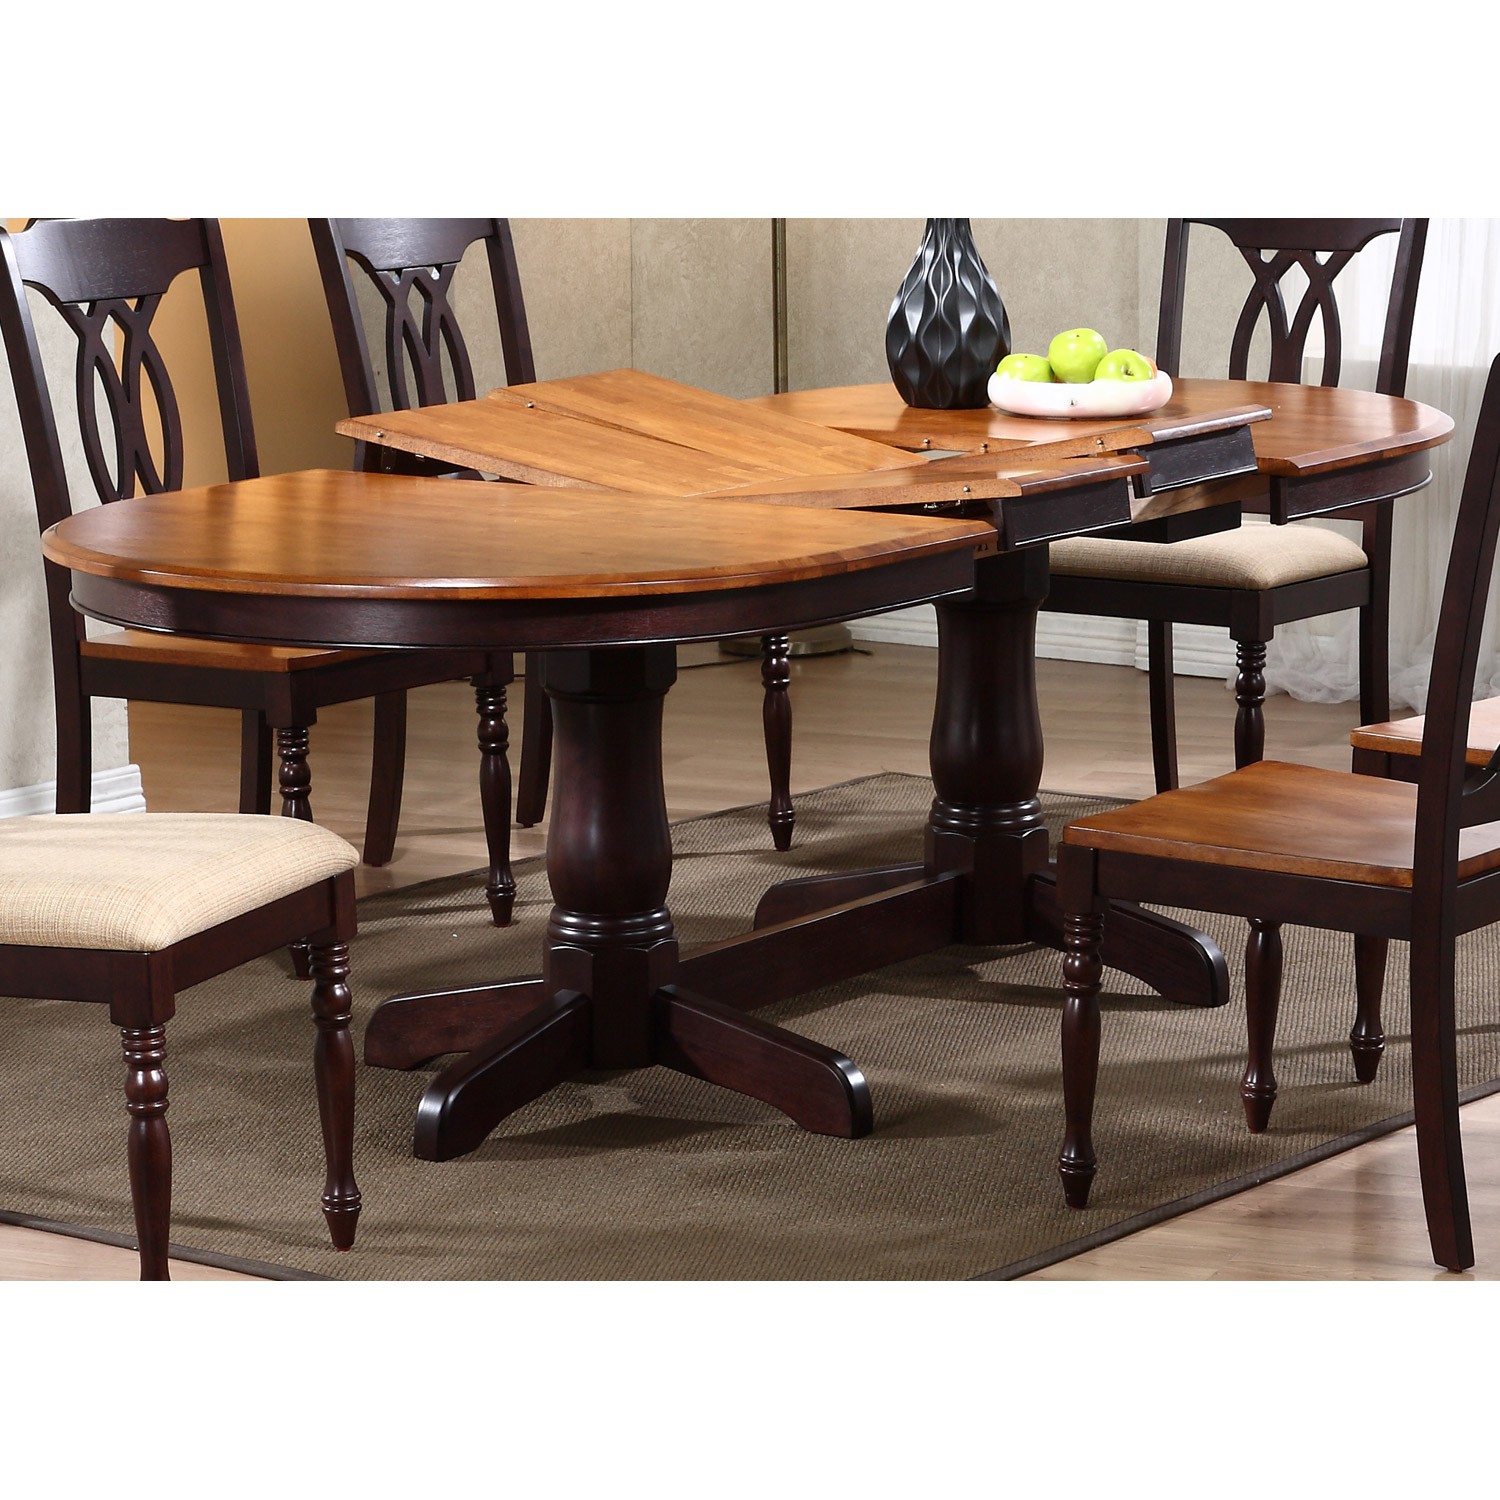 Gatsby oval dining table double butterfly leaf whiskey